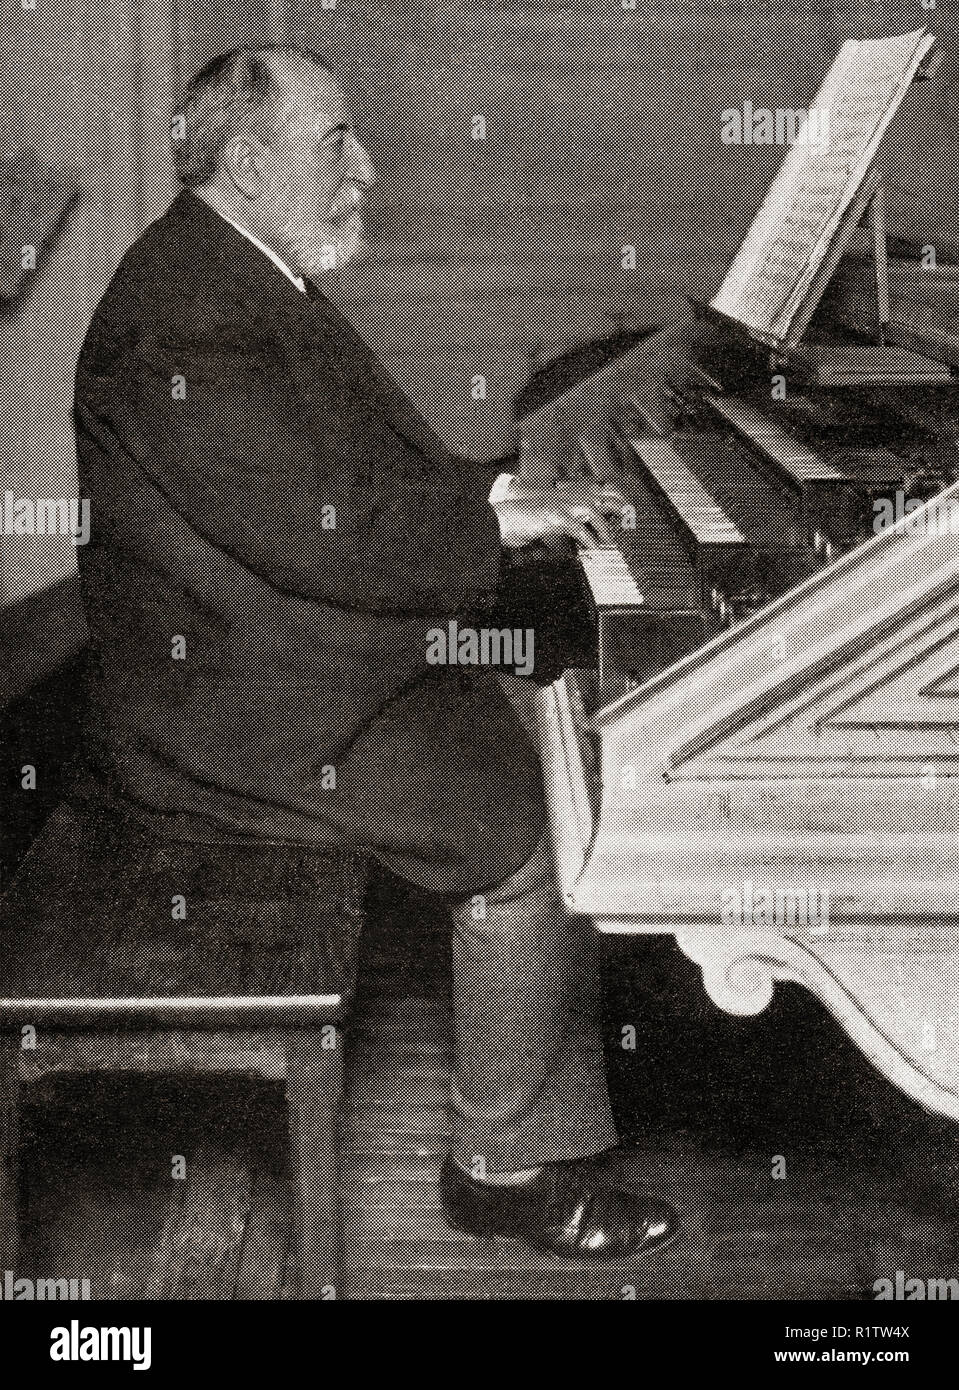 Charles-Camille Saint-Saëns, 1835 – 1921.  French composer, organist, conductor and pianist of the Romantic era.  From La Esfera, published 1921. Stock Photo